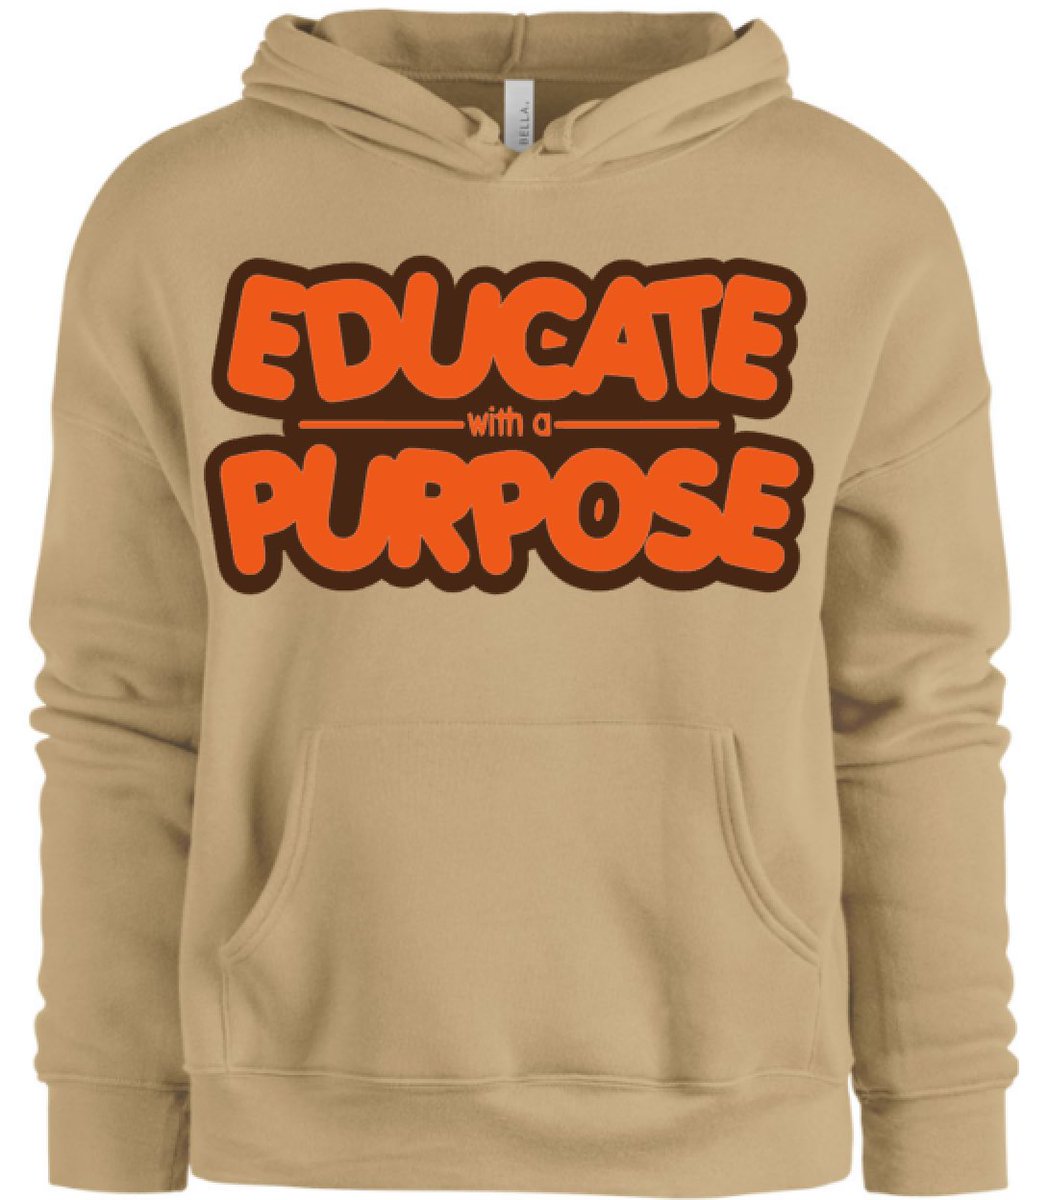 Hoodie SZN is here🔥🔥
Check out our new collection of hoodies. Gift your favorite educators and teachers with a hoodie this season. 
Retweet and Share with your friends educatewithapurpose.org 
#EducateWithAPurpose #VirtualSchool #Educate #MillennialEducator #BlackBusiness